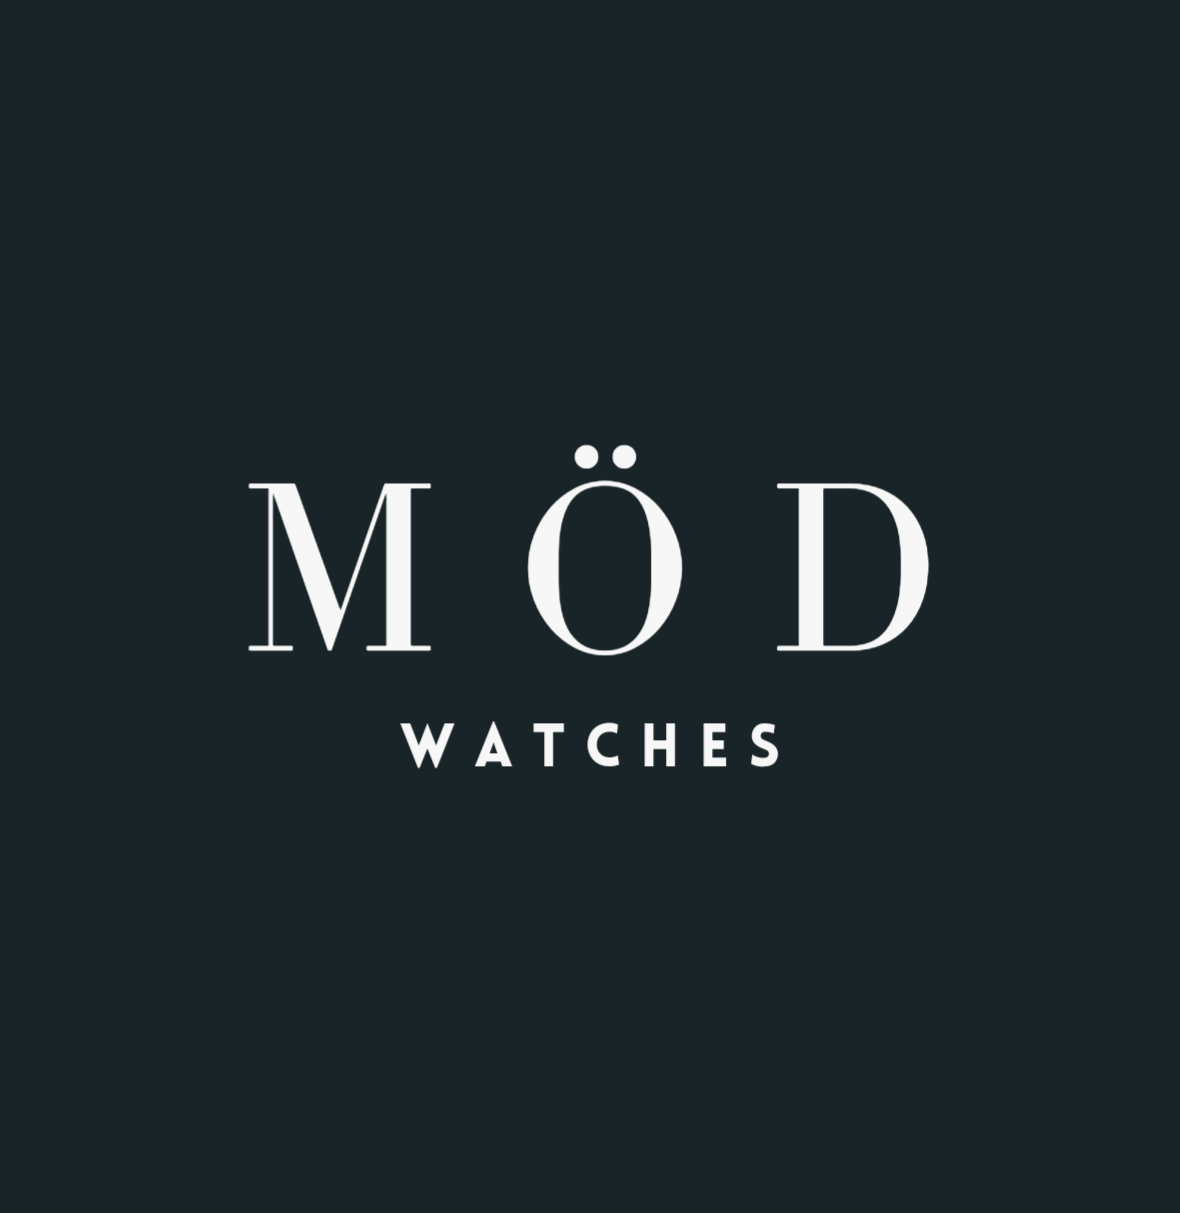 Modwatches